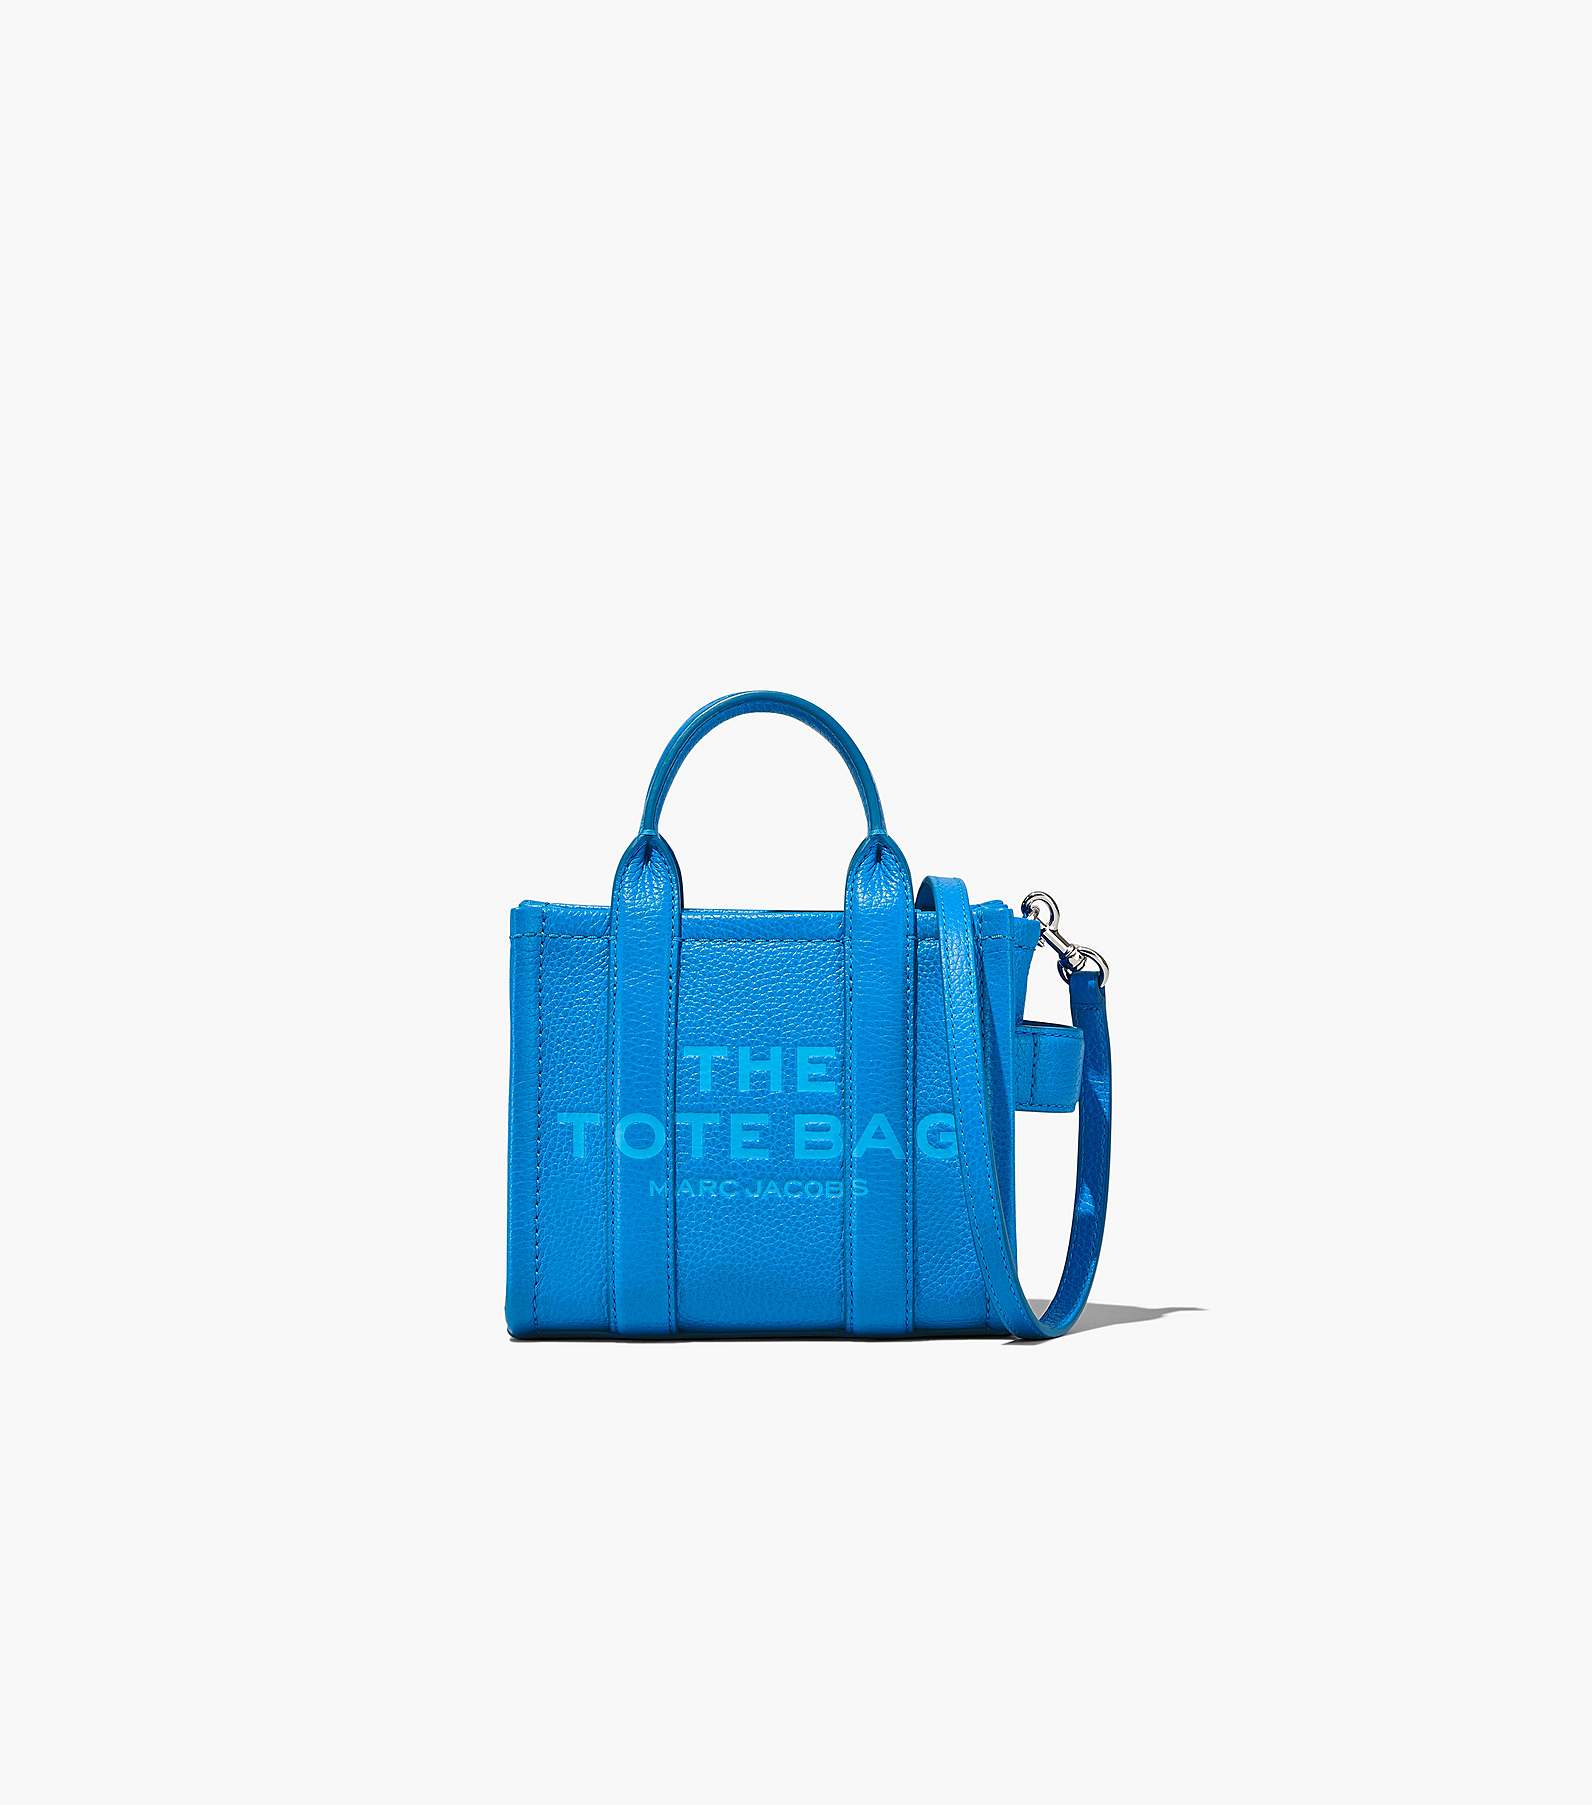 The Leather Micro Tote Bag(The Tote Bag)